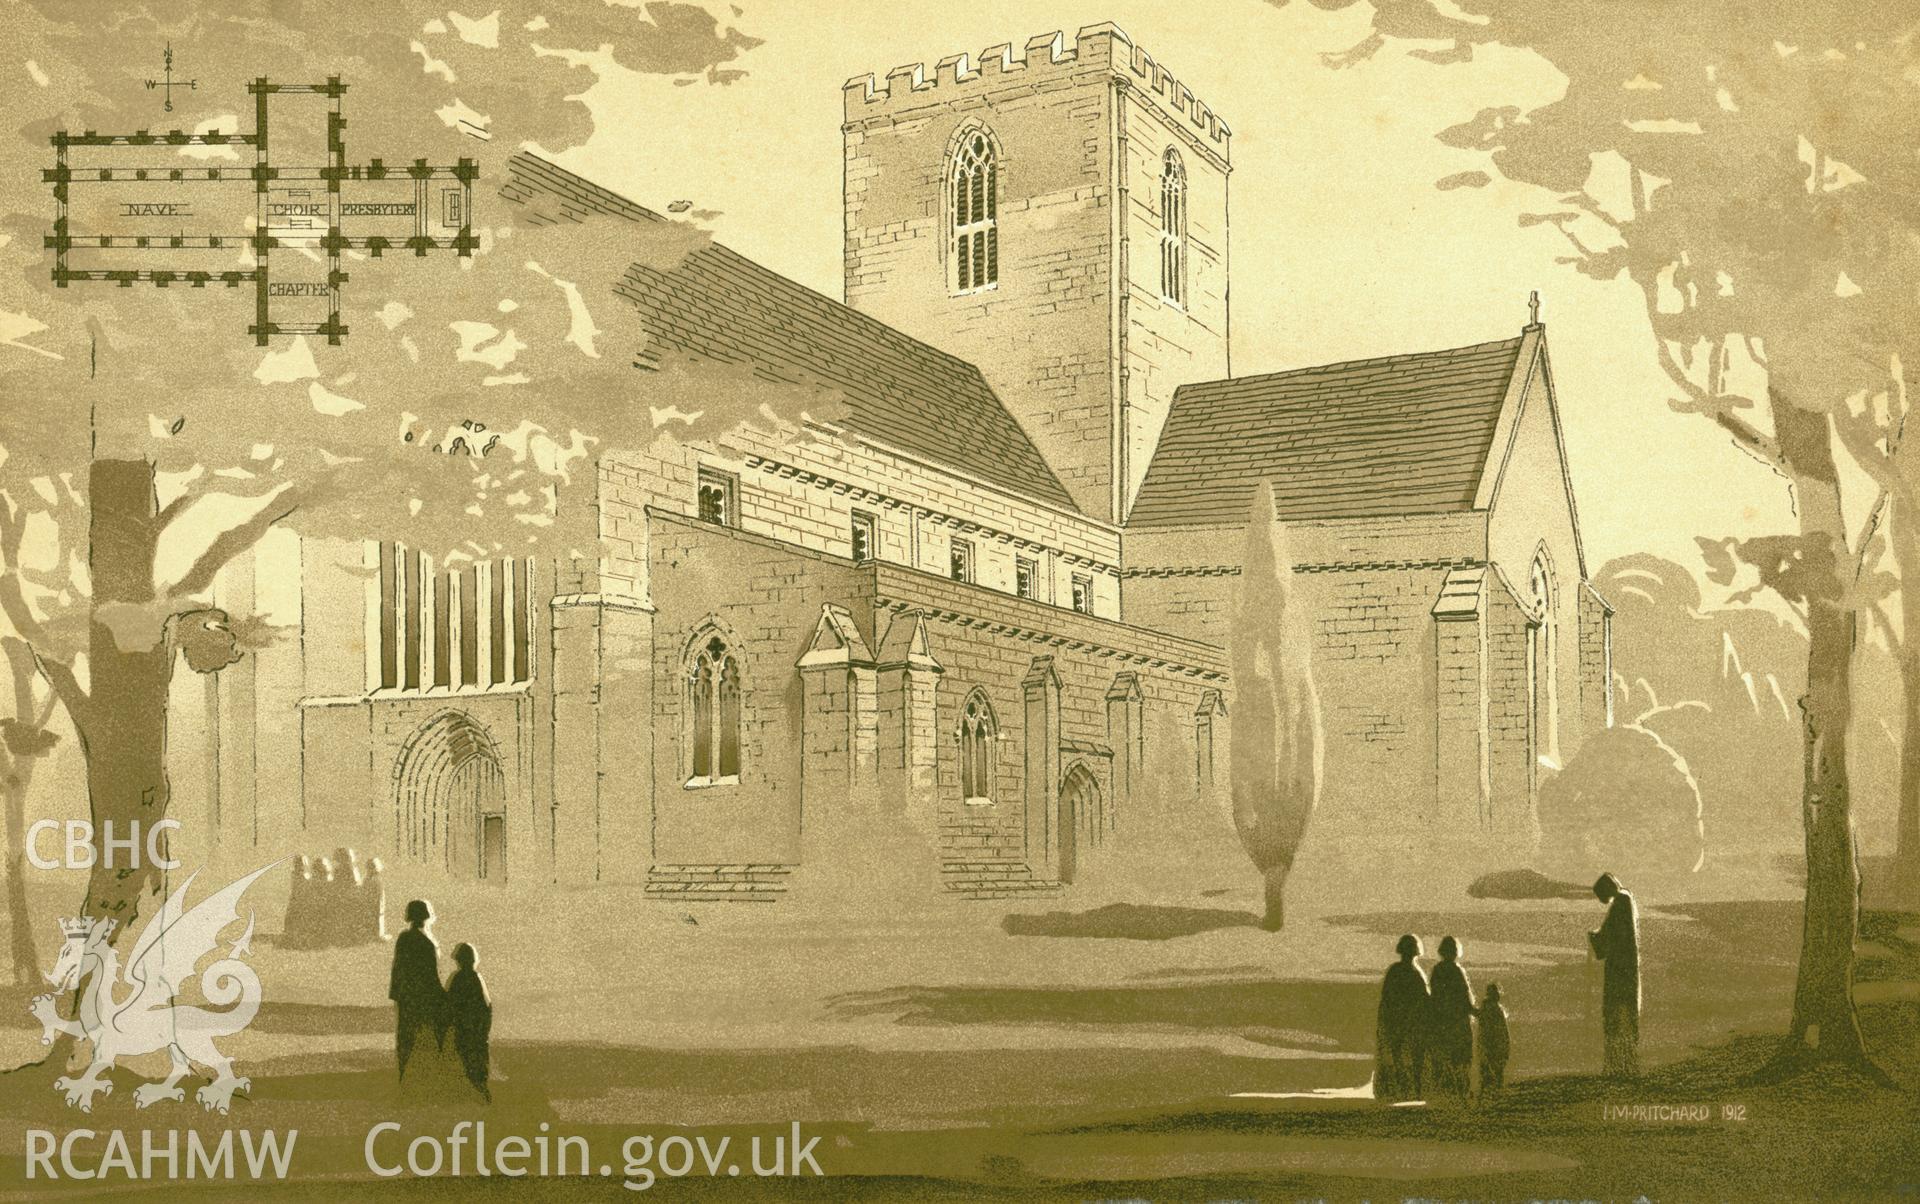 Digitized copy of a drawing by I.M. Pritchard, showing St Asaph Cathedral, copied from the frontispiece of RCAHMW Flintshire Inventory 1912.